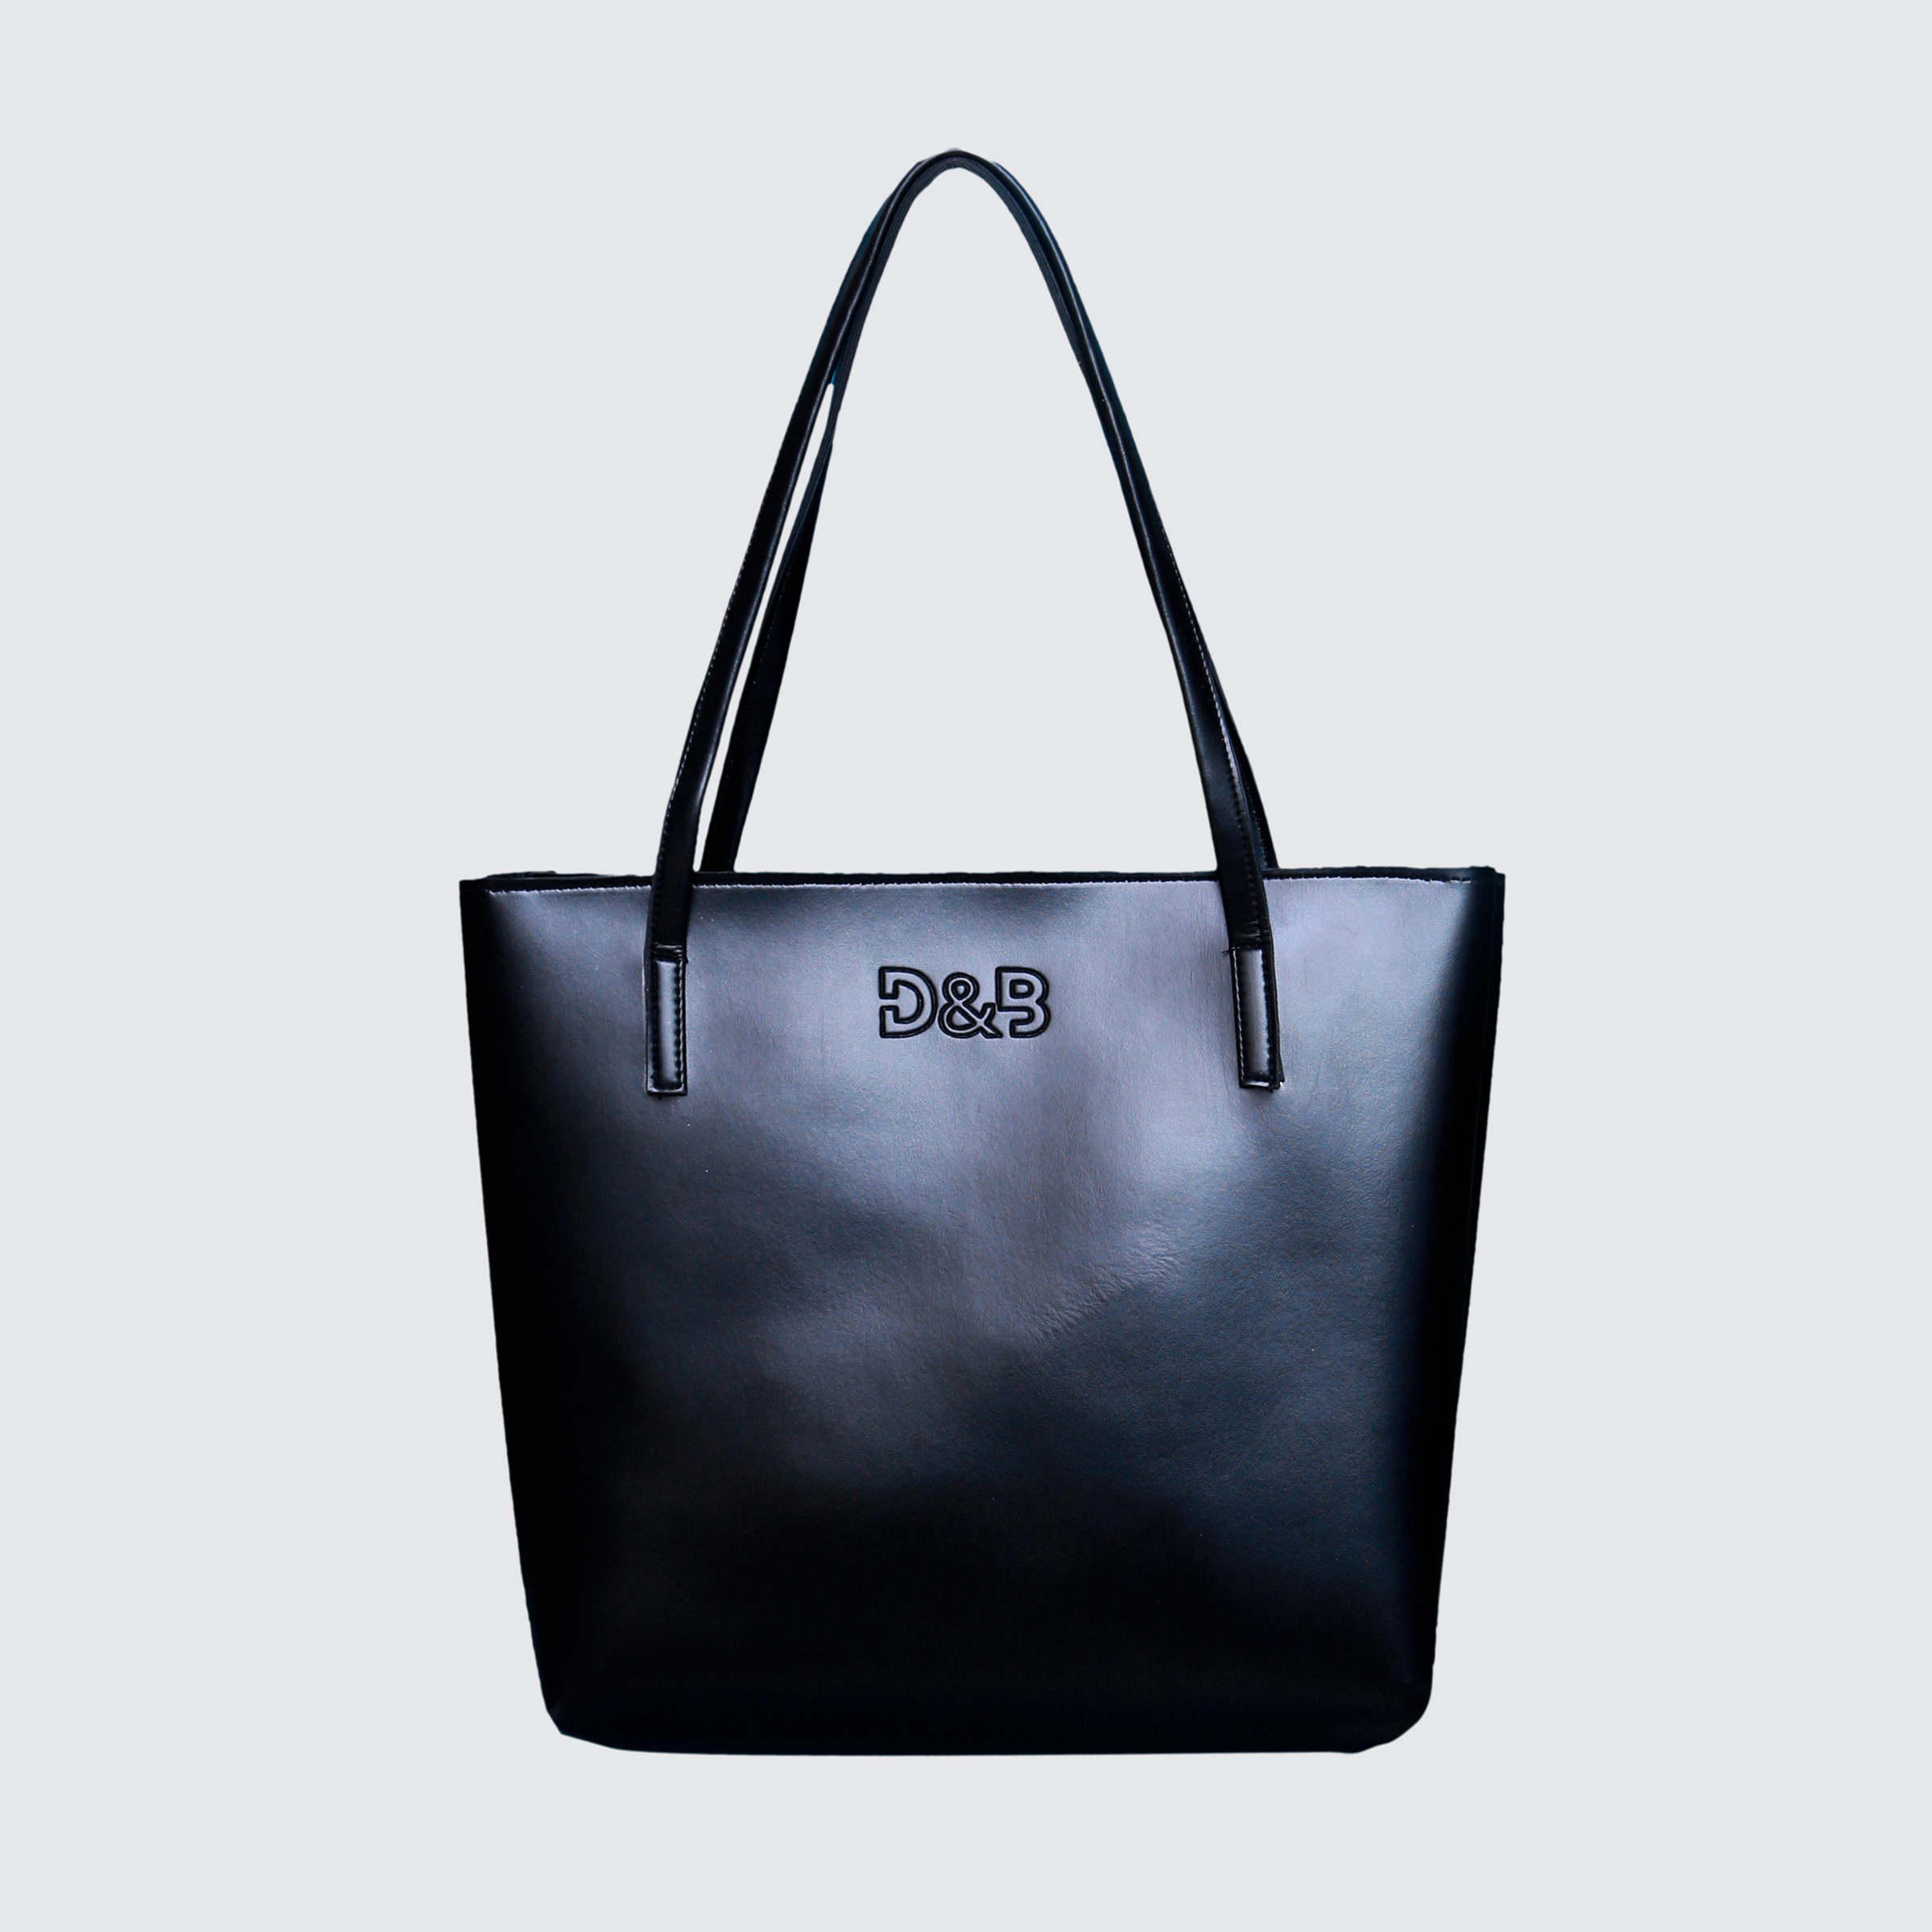 Buy Stylish Ladies Tote Bags in Pakistan for Every Occasion